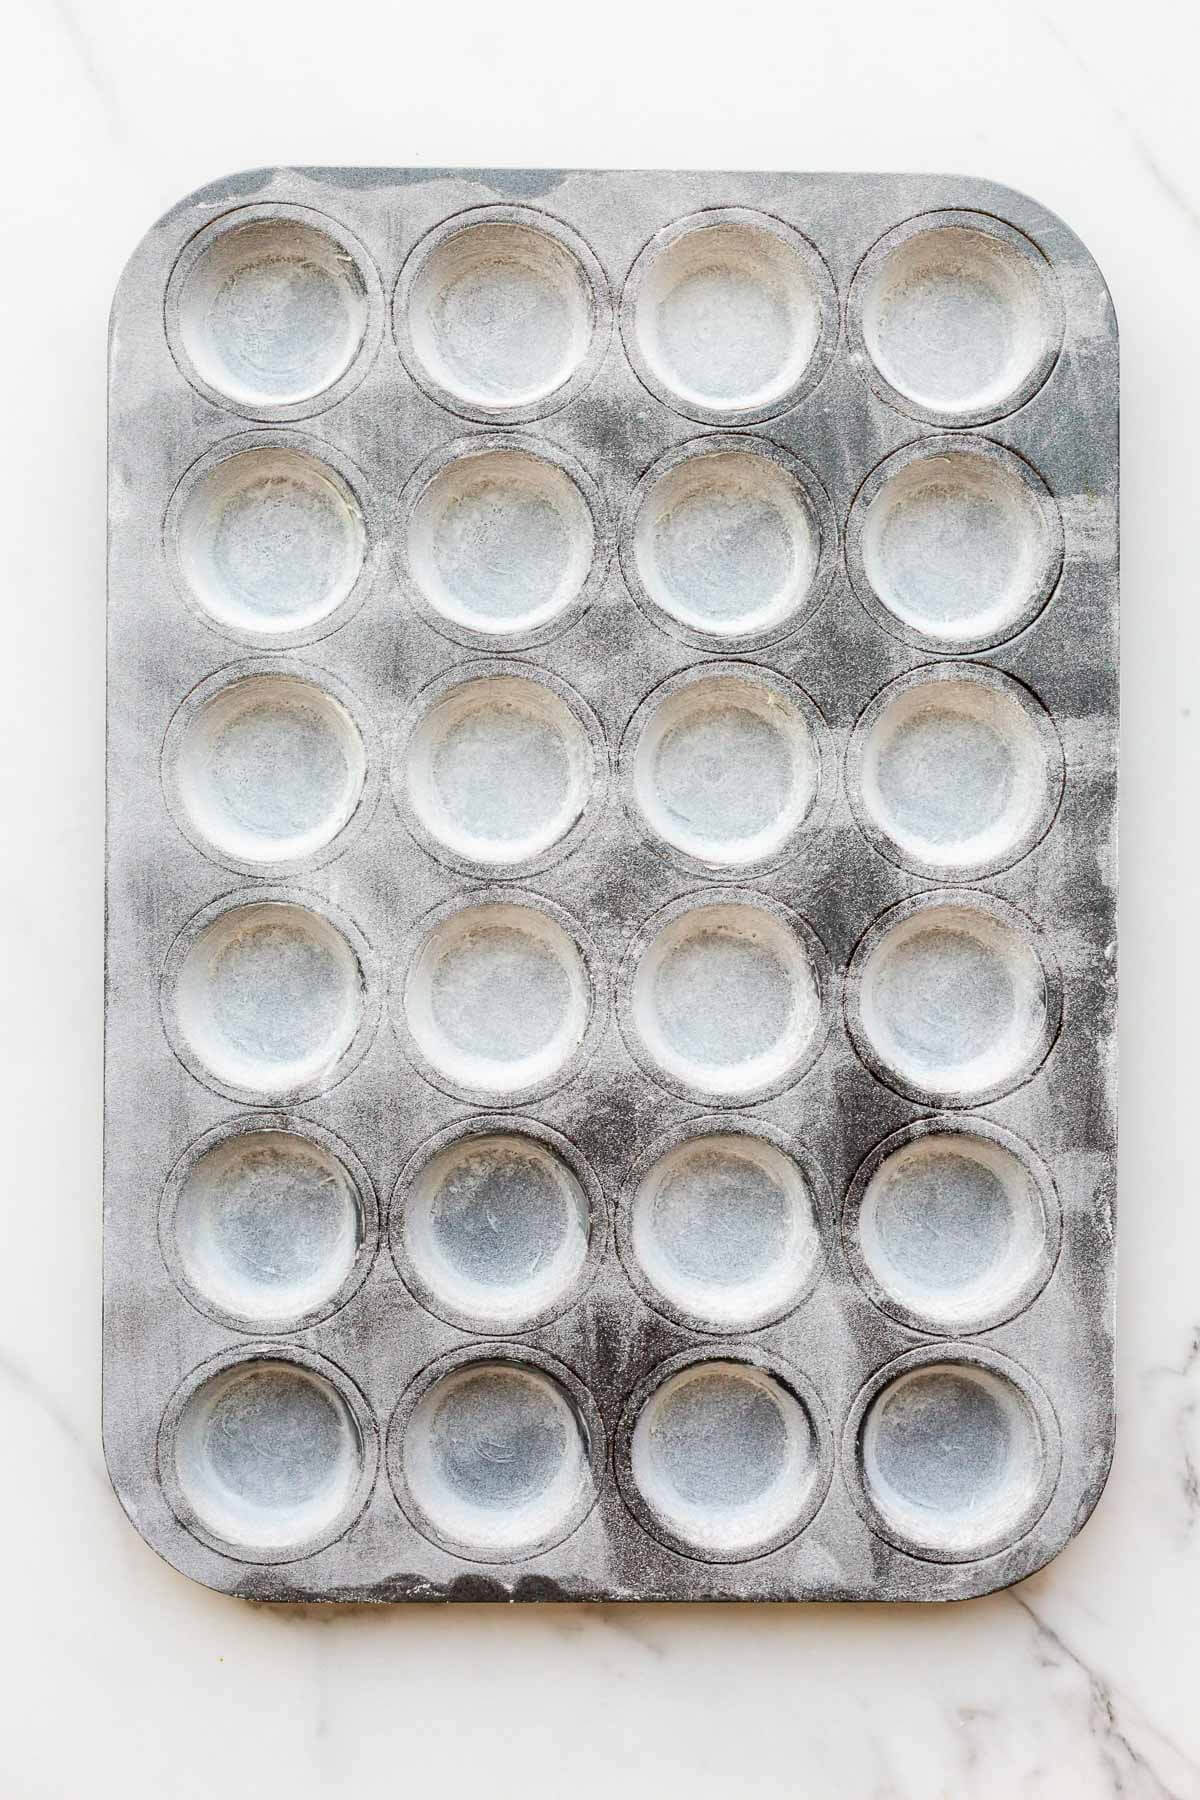 A greased and floured mini muffin pan ready to use for baking cakes and muffins without them sticking to the pan.